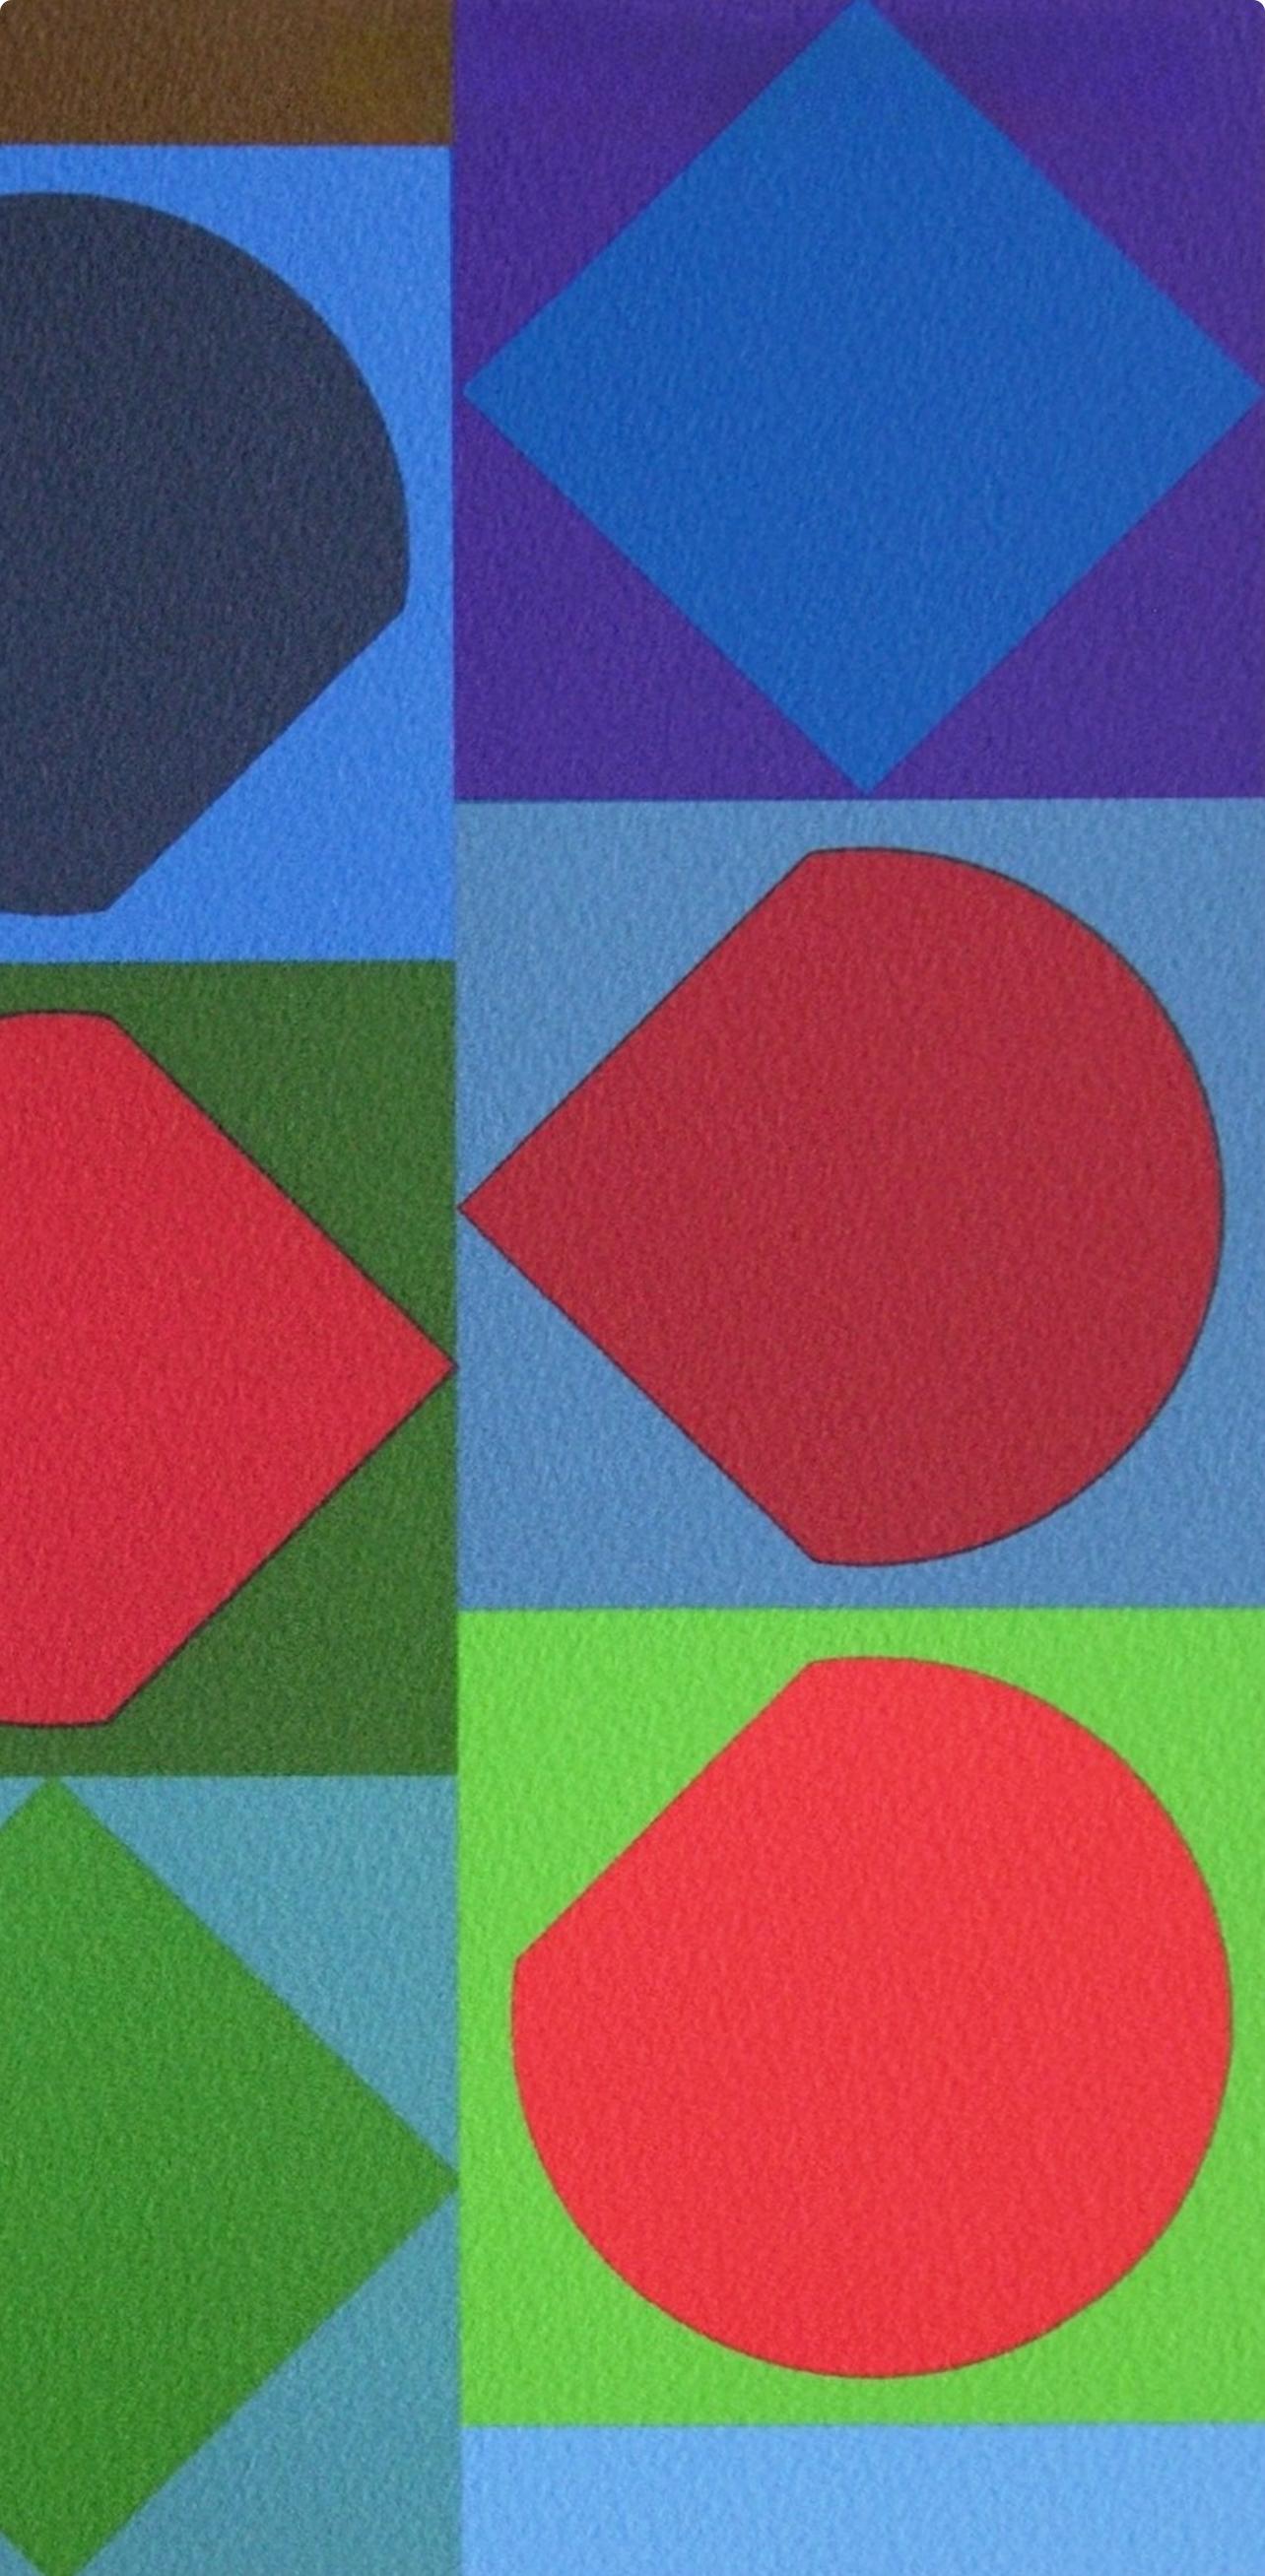 Vasarely, Beryll, Souvenirs et portraits d'artistes (after) - Modern Print by Victor Vasarely